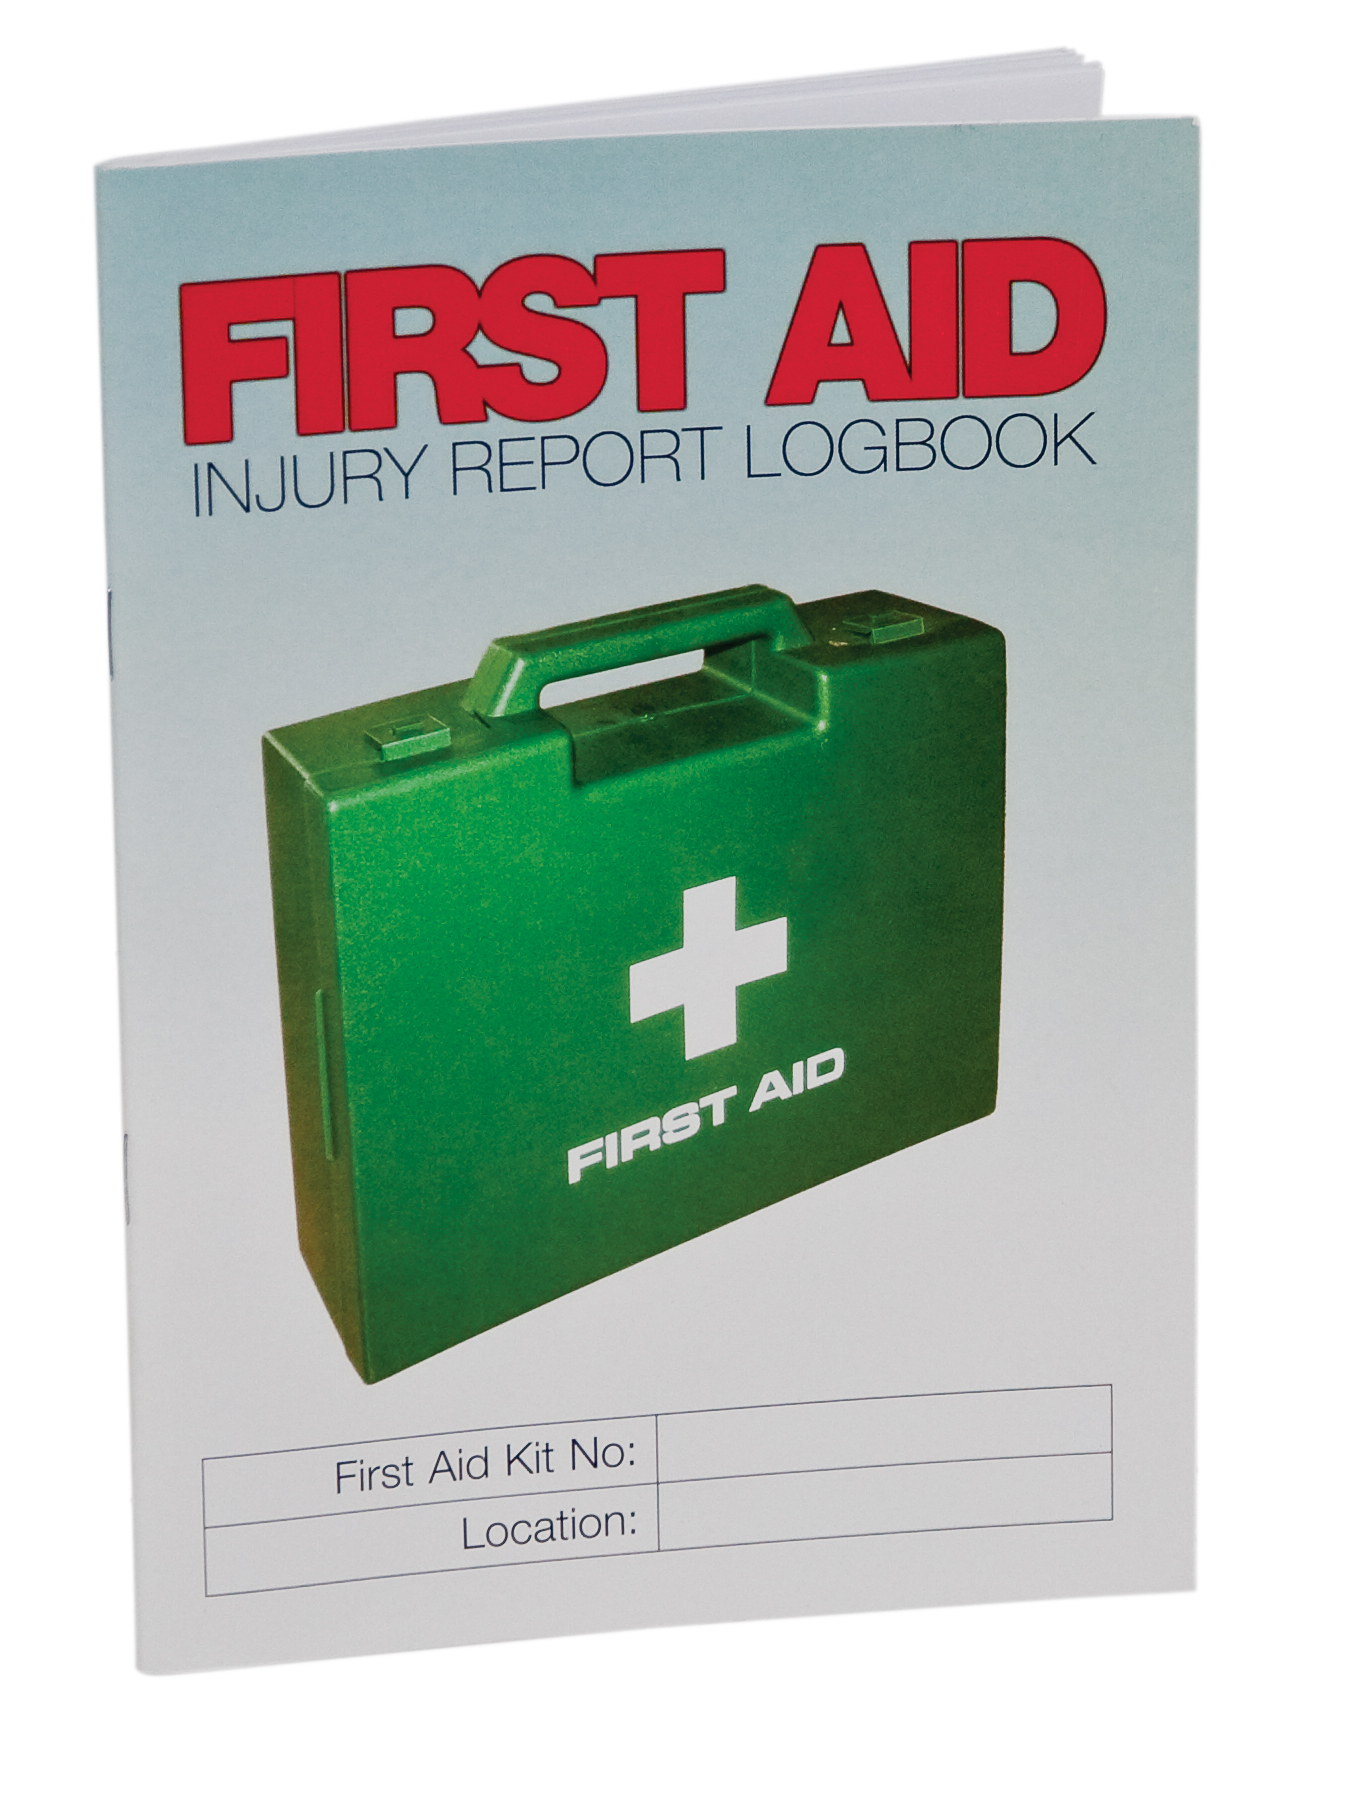 UNIFORM SAFETY FIRST AID INJURY REPORT LOGBOOK A5 SIZE 